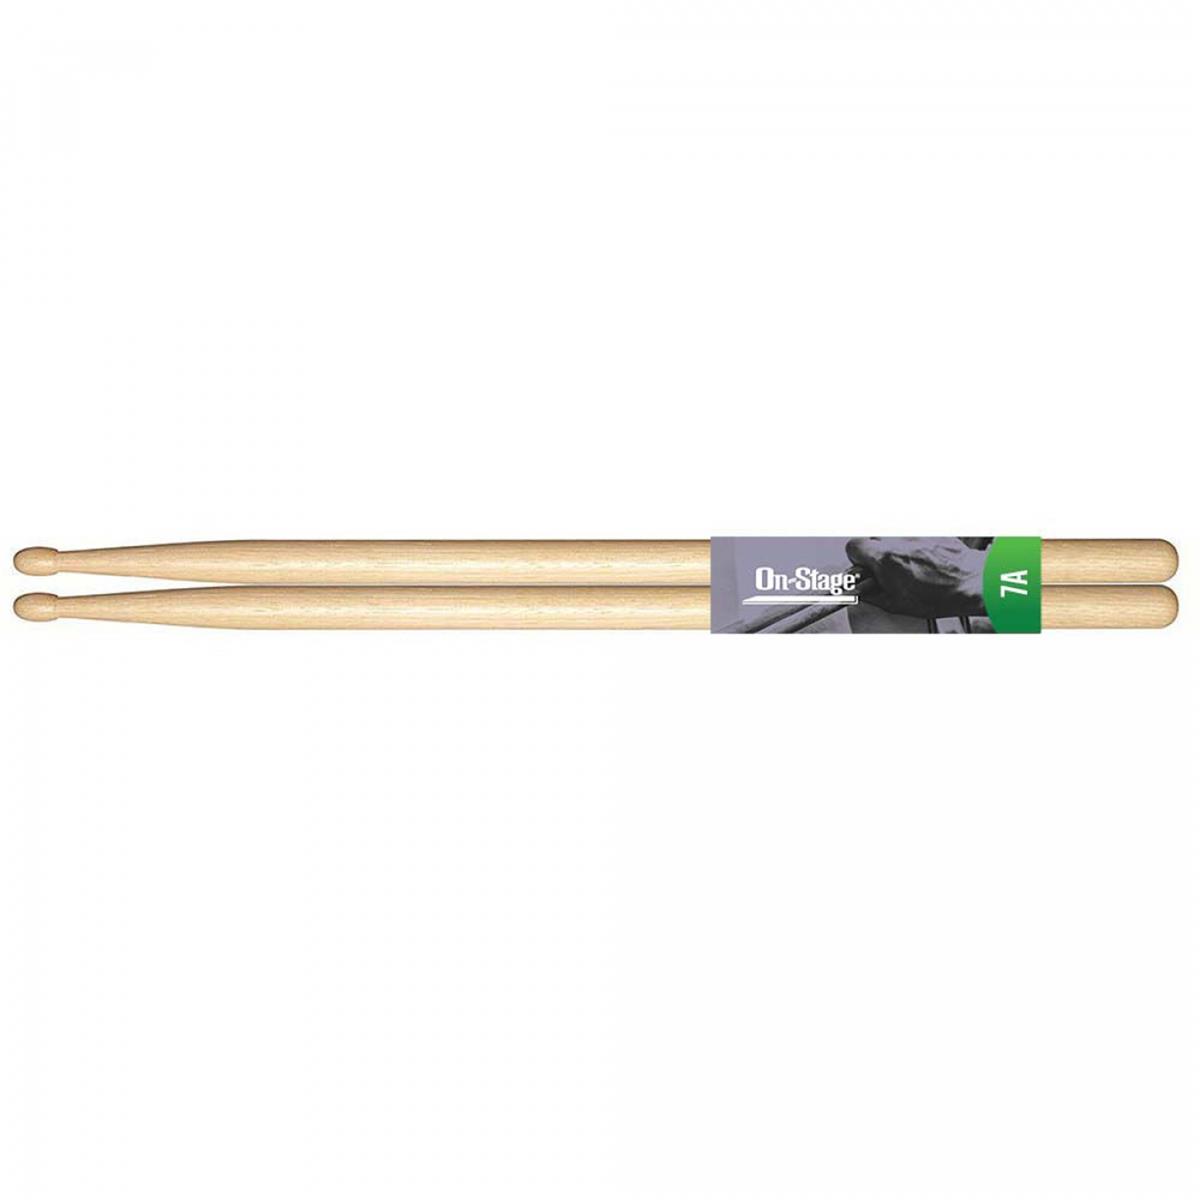 Image of On-Stage ON-Stage AMH7AW American Made Hickory Drumsticks